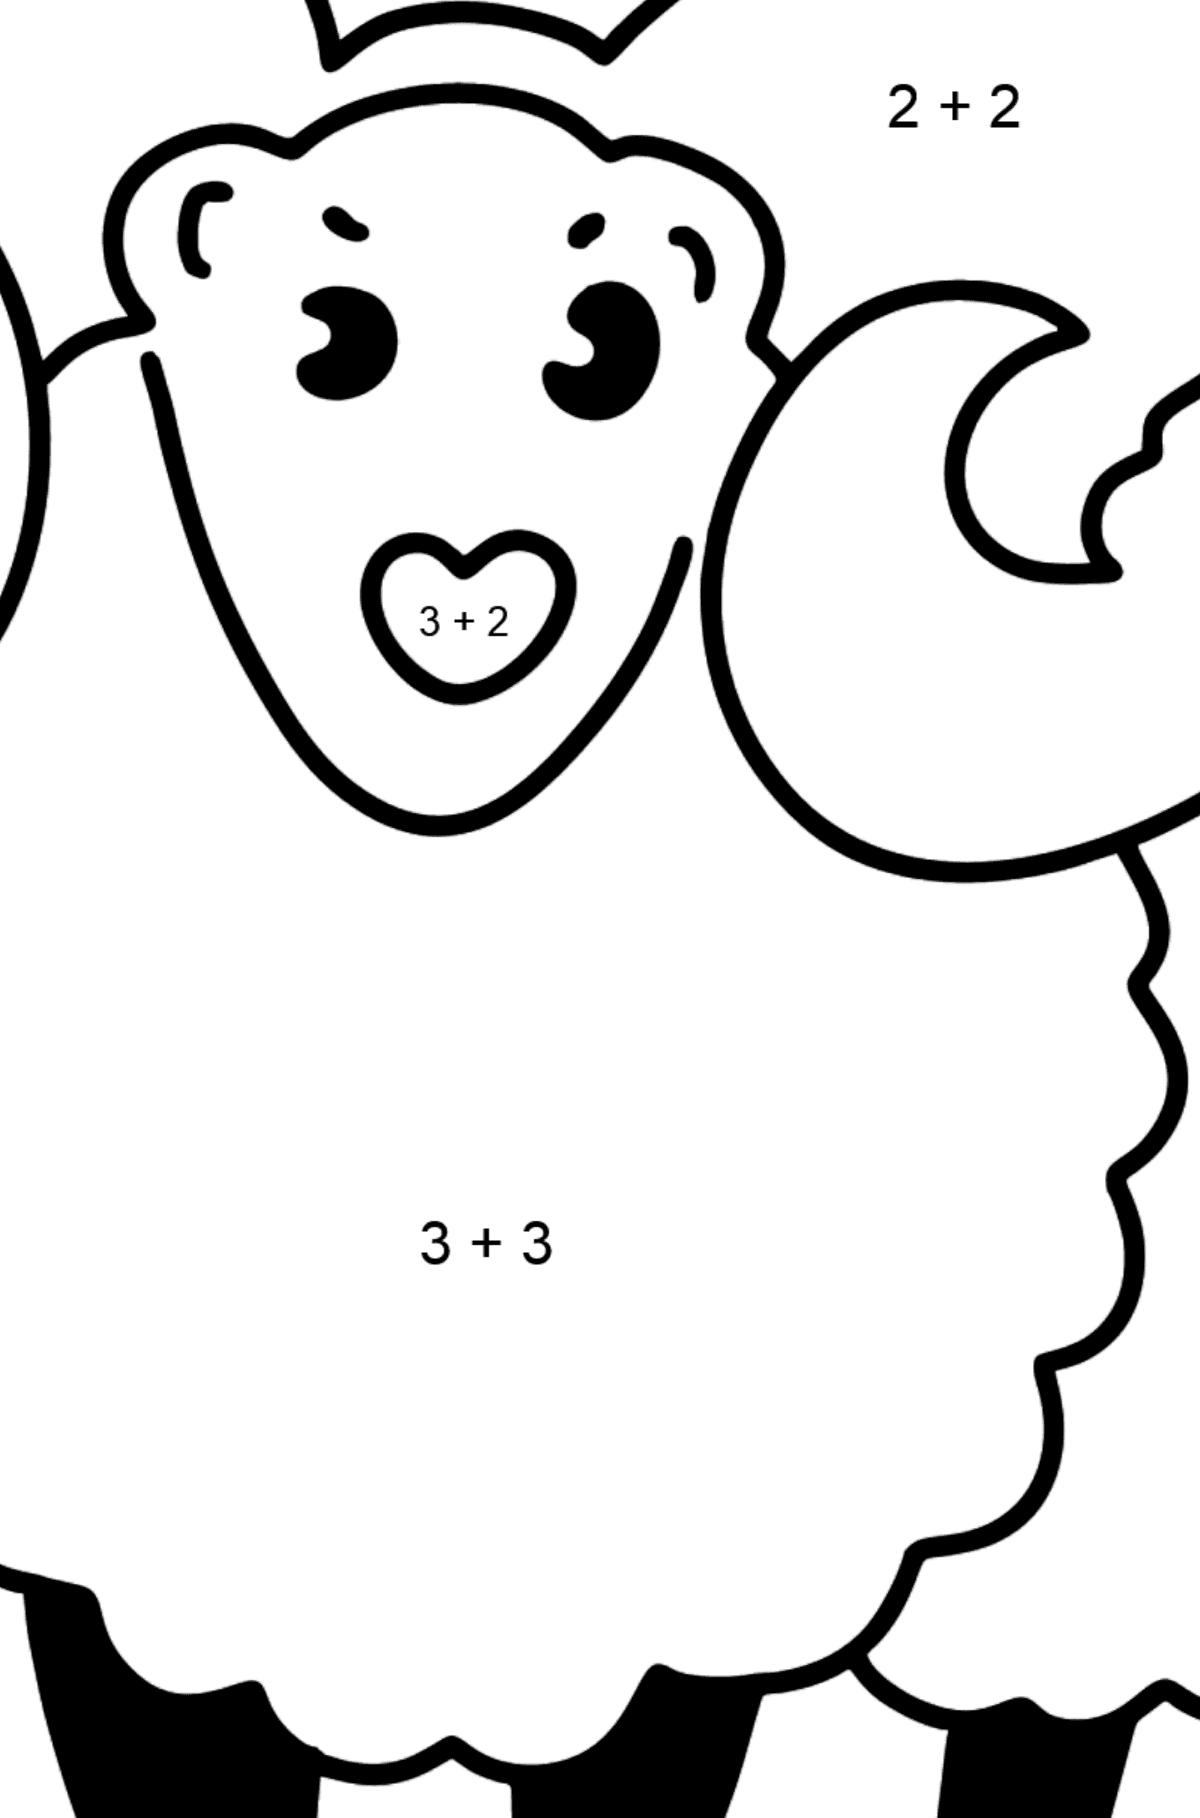 Home Lamb coloring page - Math Coloring - Addition for Kids